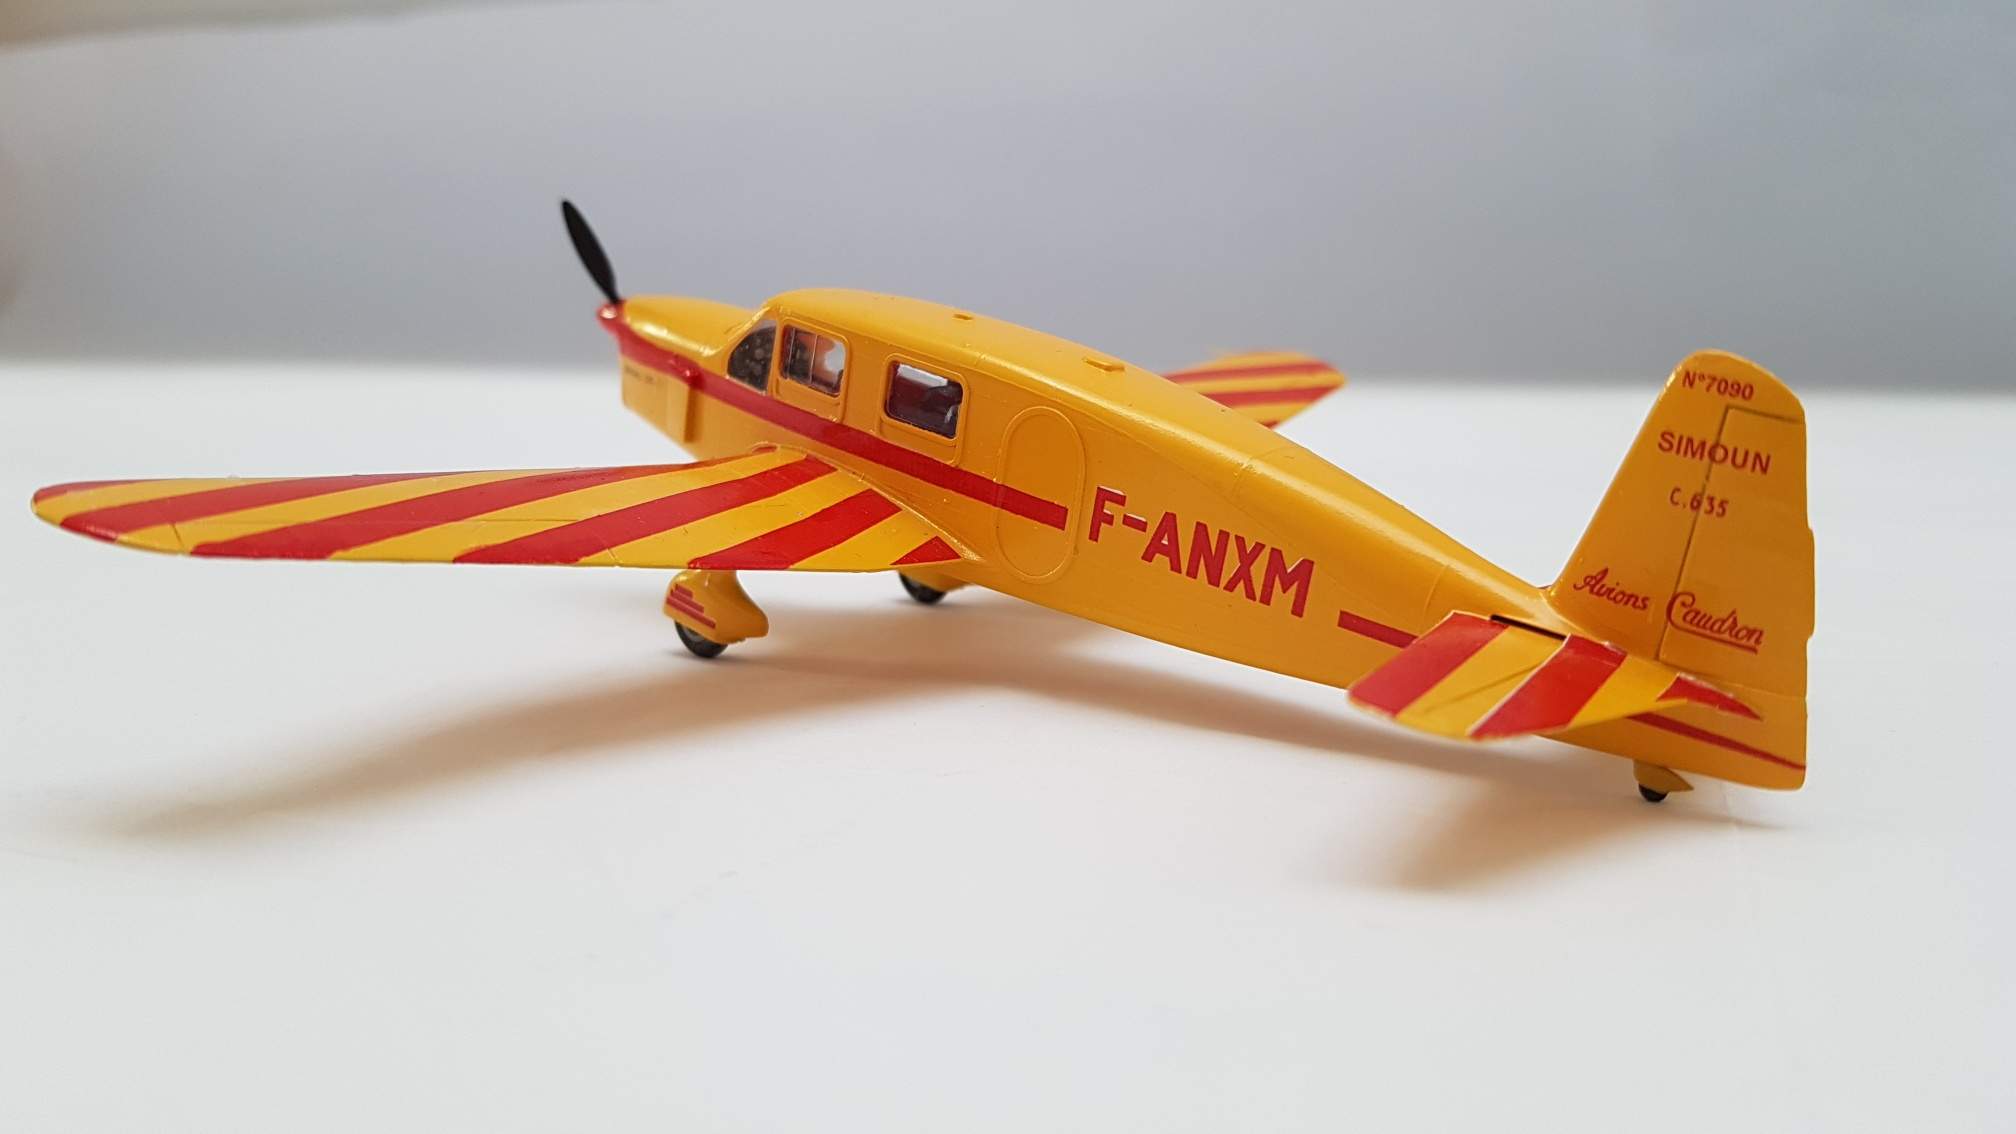 OOB French civil F-ANXM, Heller, 1:72